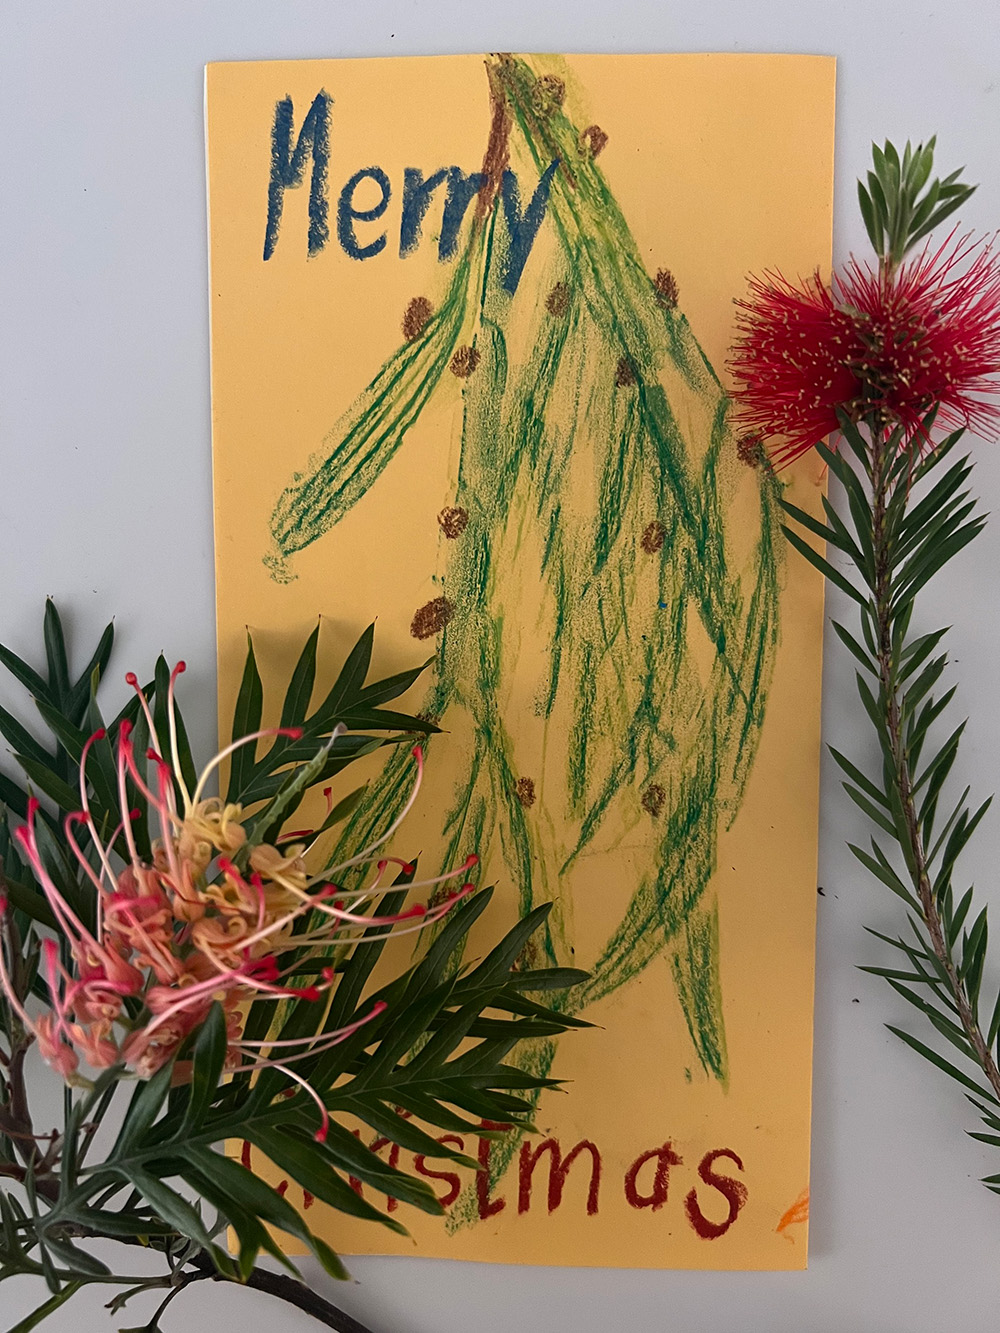 A Holiday car that's decorated with Australian flora and the phrase, "Merry Christmas"